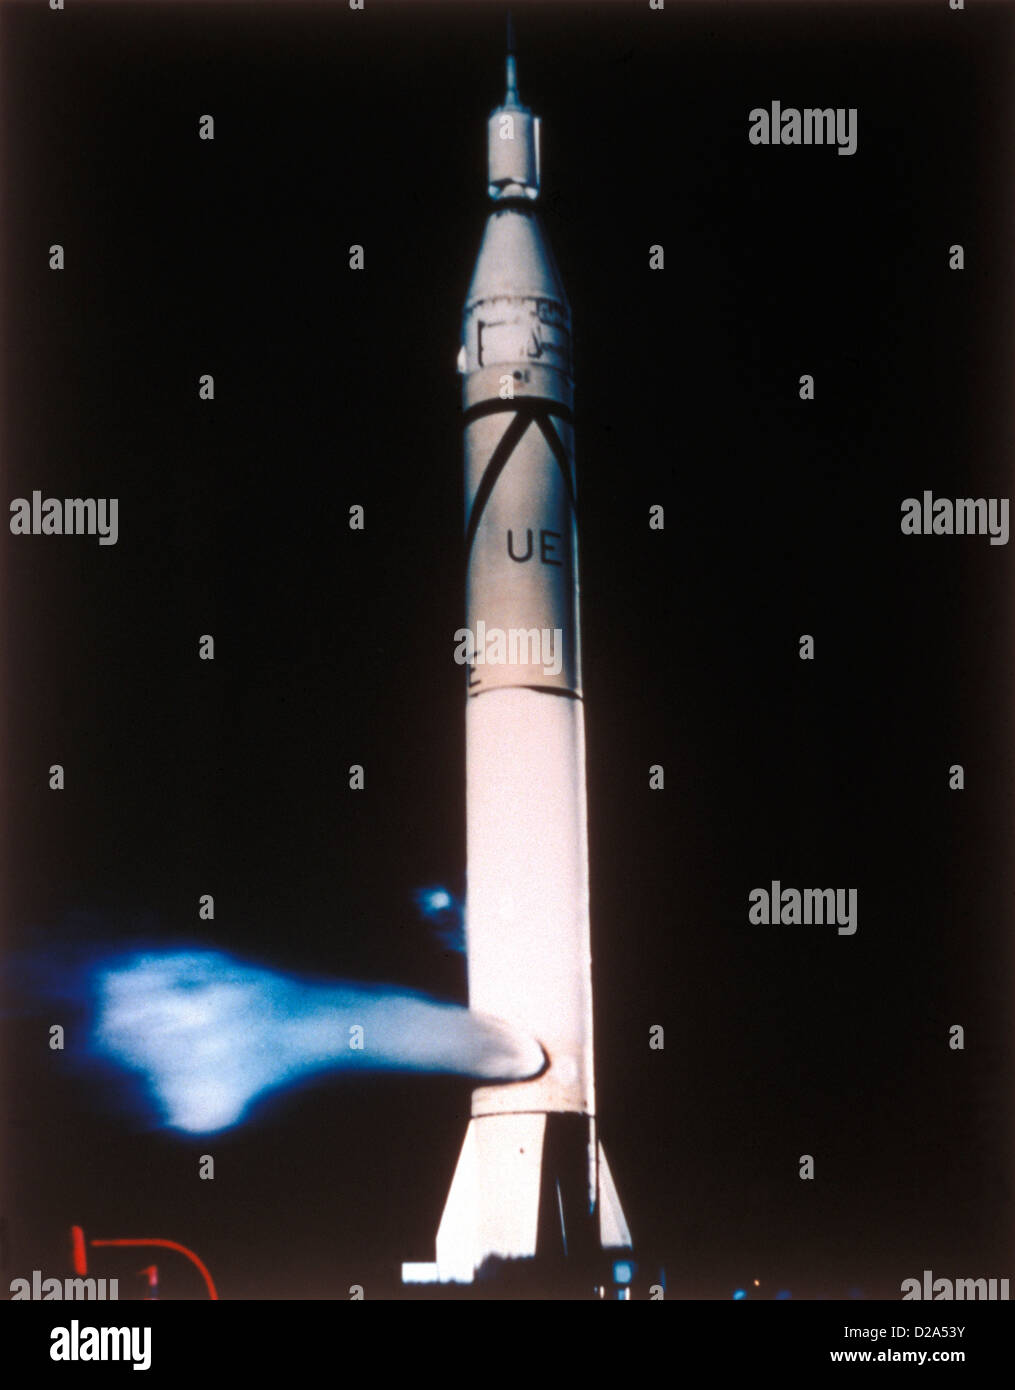 An Image Of Explorer I. The First U.S. Satellite To Obtain Earth Orbit. Stock Photo